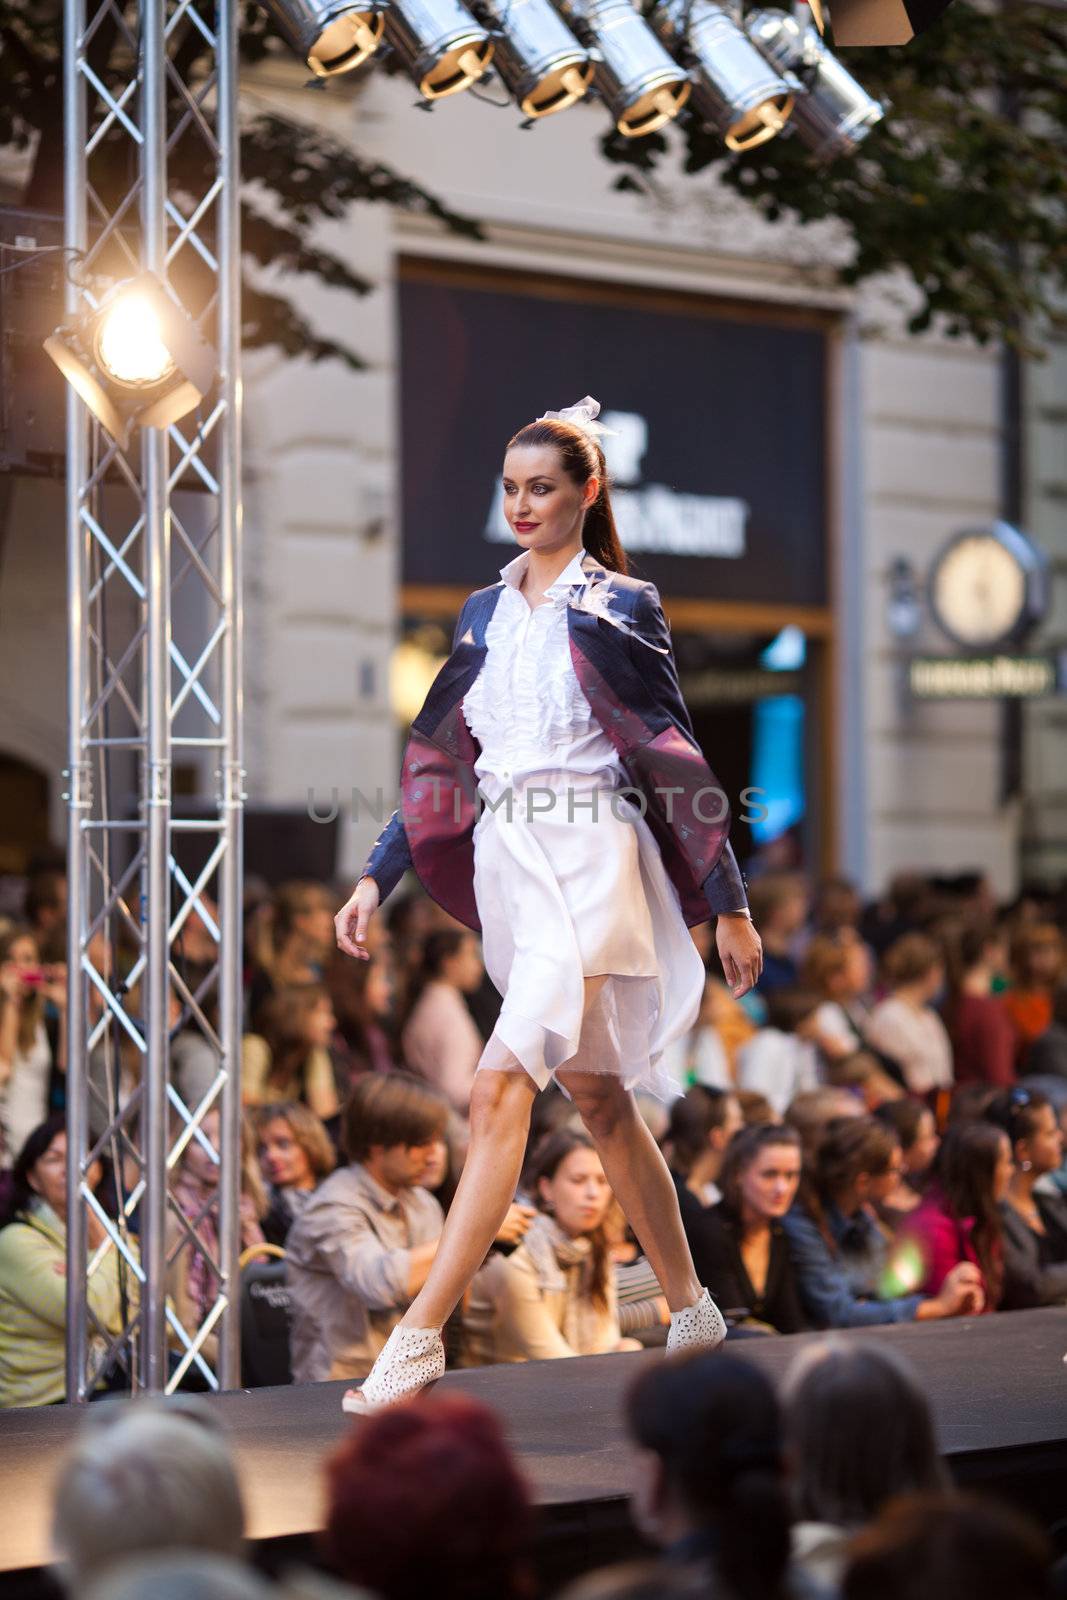 PRAGUE-SEPTEMBER 24: A model walks the runway during the 2011 au by jannyjus